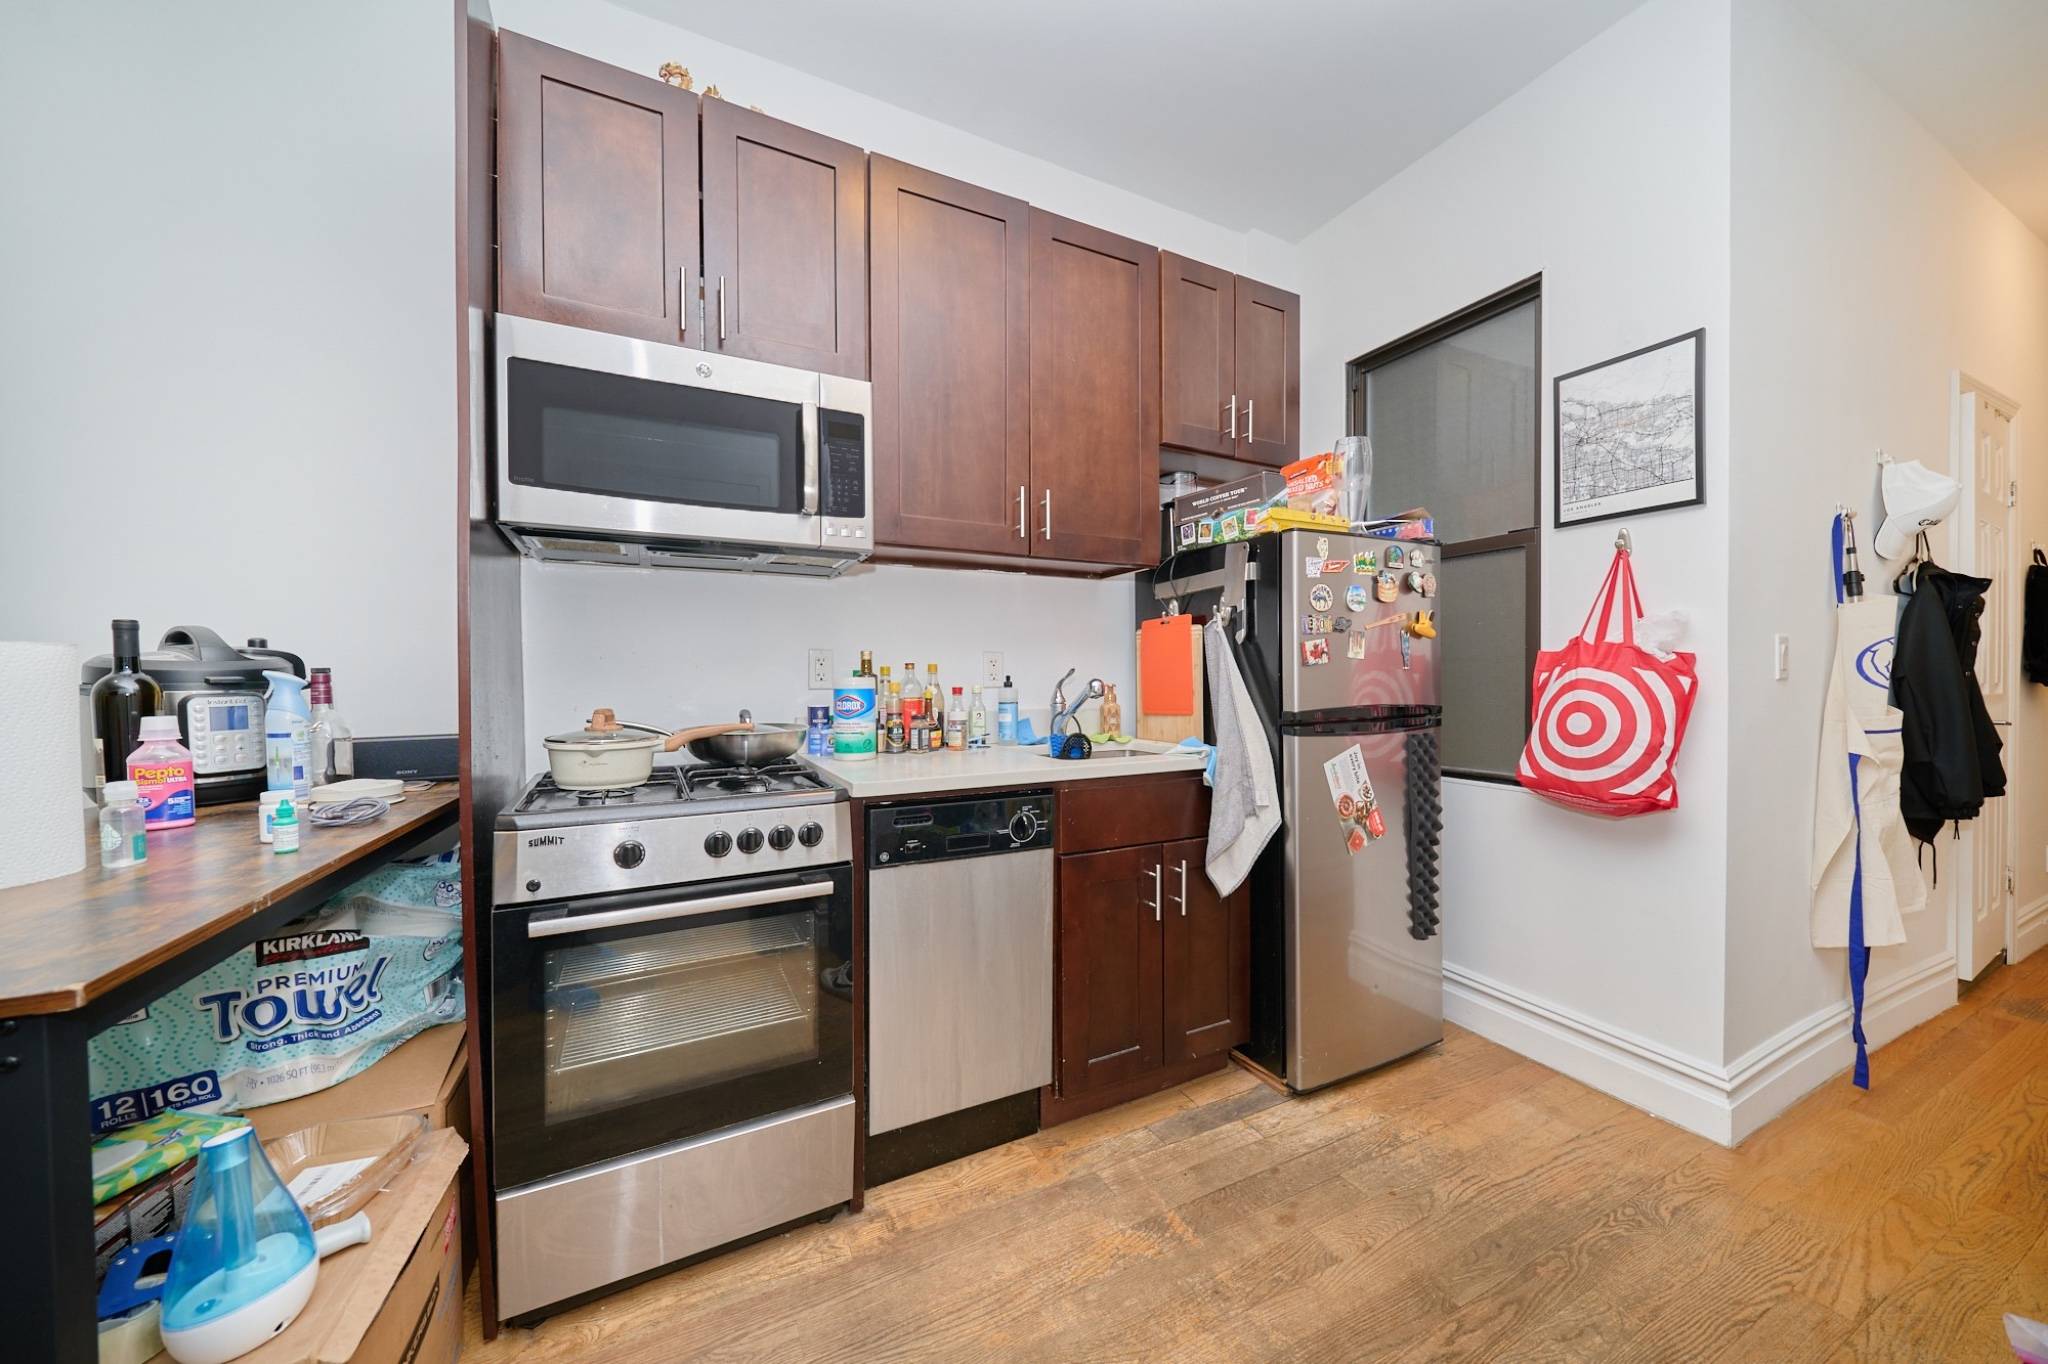 Welcome to this spectacular 2 bedroom, 2 bath apartment in the East Village available May 1st.